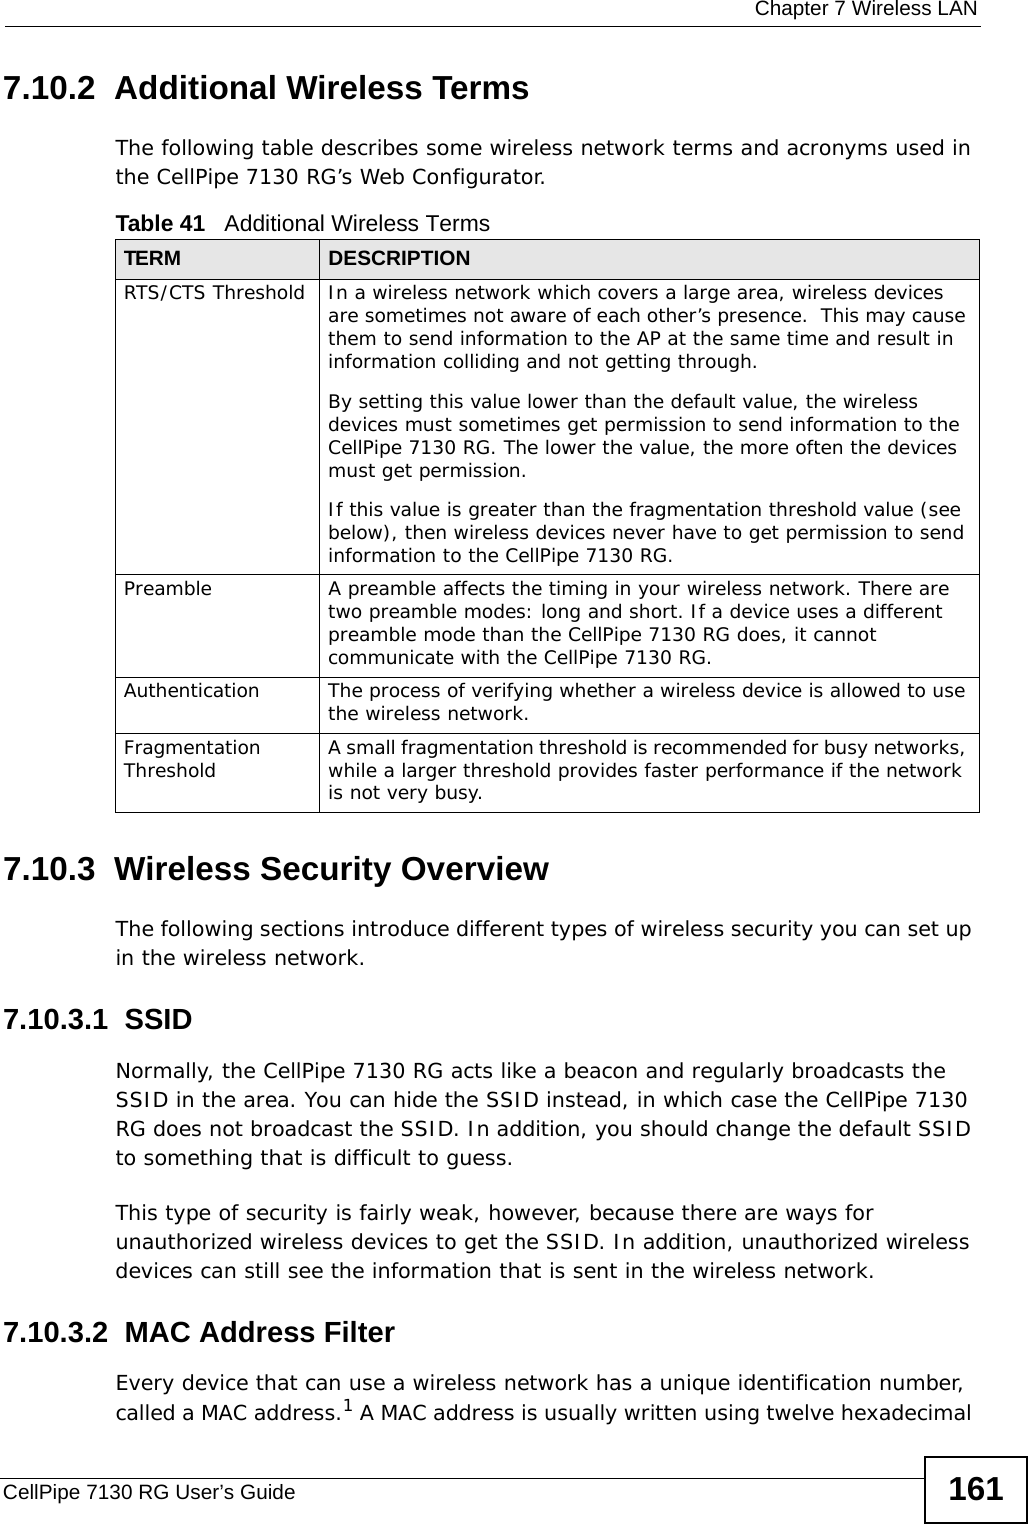  Chapter 7 Wireless LANCellPipe 7130 RG User’s Guide 1617.10.2  Additional Wireless TermsThe following table describes some wireless network terms and acronyms used in the CellPipe 7130 RG’s Web Configurator.7.10.3  Wireless Security OverviewThe following sections introduce different types of wireless security you can set up in the wireless network.7.10.3.1  SSIDNormally, the CellPipe 7130 RG acts like a beacon and regularly broadcasts the SSID in the area. You can hide the SSID instead, in which case the CellPipe 7130 RG does not broadcast the SSID. In addition, you should change the default SSID to something that is difficult to guess.This type of security is fairly weak, however, because there are ways for unauthorized wireless devices to get the SSID. In addition, unauthorized wireless devices can still see the information that is sent in the wireless network.7.10.3.2  MAC Address FilterEvery device that can use a wireless network has a unique identification number, called a MAC address.1 A MAC address is usually written using twelve hexadecimal Table 41   Additional Wireless TermsTERM DESCRIPTIONRTS/CTS Threshold In a wireless network which covers a large area, wireless devices are sometimes not aware of each other’s presence.  This may cause them to send information to the AP at the same time and result in information colliding and not getting through.By setting this value lower than the default value, the wireless devices must sometimes get permission to send information to the CellPipe 7130 RG. The lower the value, the more often the devices must get permission.If this value is greater than the fragmentation threshold value (see below), then wireless devices never have to get permission to send information to the CellPipe 7130 RG.Preamble A preamble affects the timing in your wireless network. There are two preamble modes: long and short. If a device uses a different preamble mode than the CellPipe 7130 RG does, it cannot communicate with the CellPipe 7130 RG.Authentication The process of verifying whether a wireless device is allowed to use the wireless network.Fragmentation Threshold A small fragmentation threshold is recommended for busy networks, while a larger threshold provides faster performance if the network is not very busy.